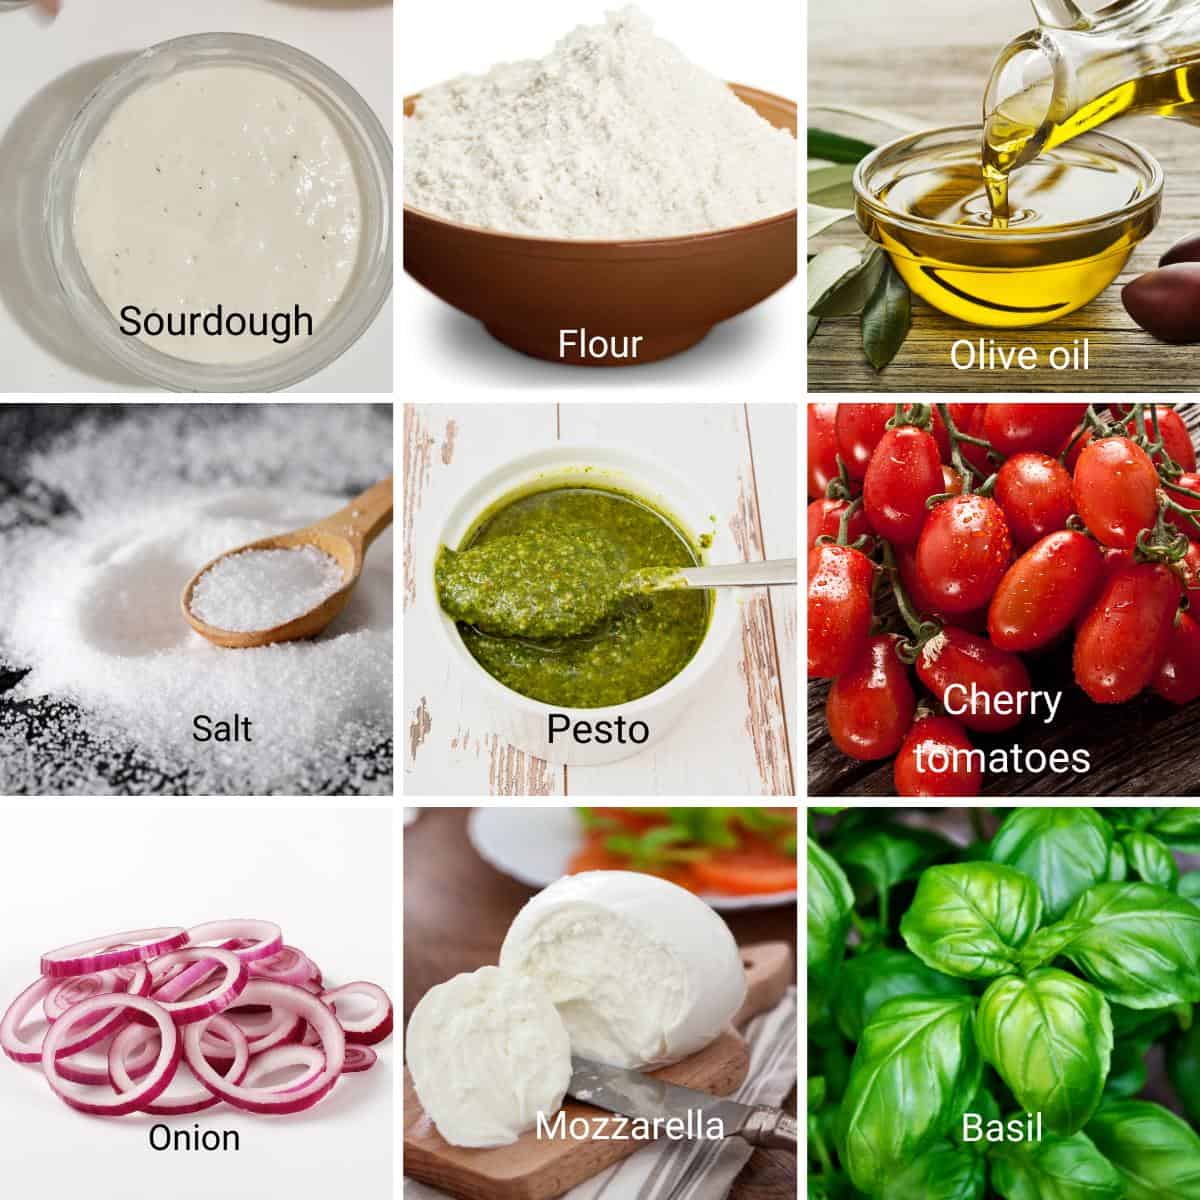 Ingredients for making focaccia with pesto.